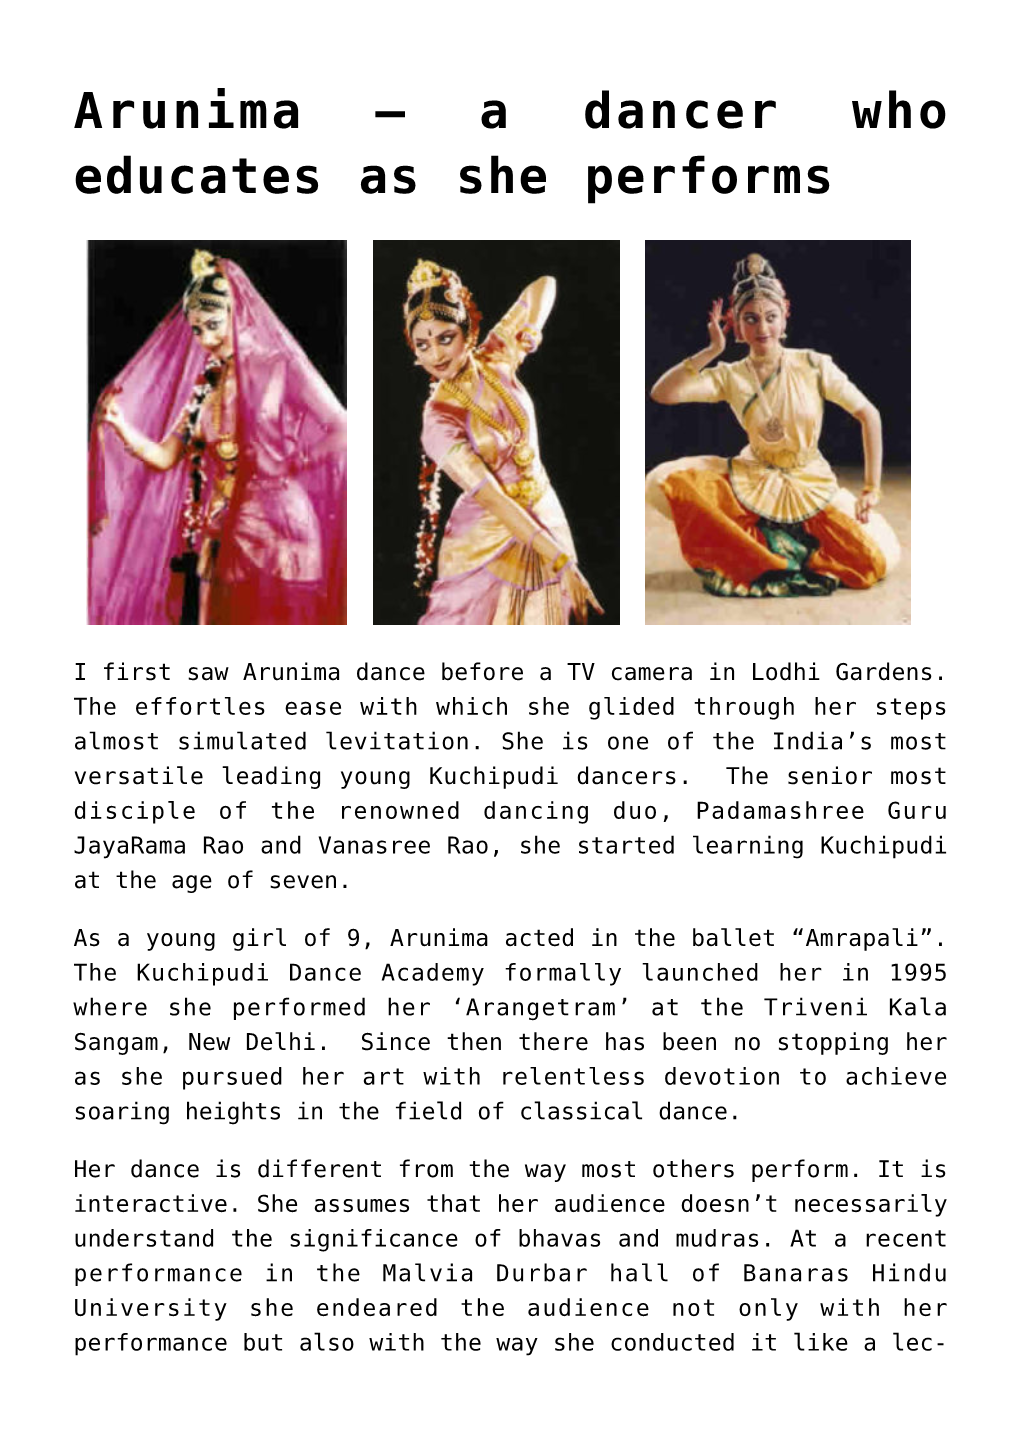 A Dancer Who Educates As She Performs